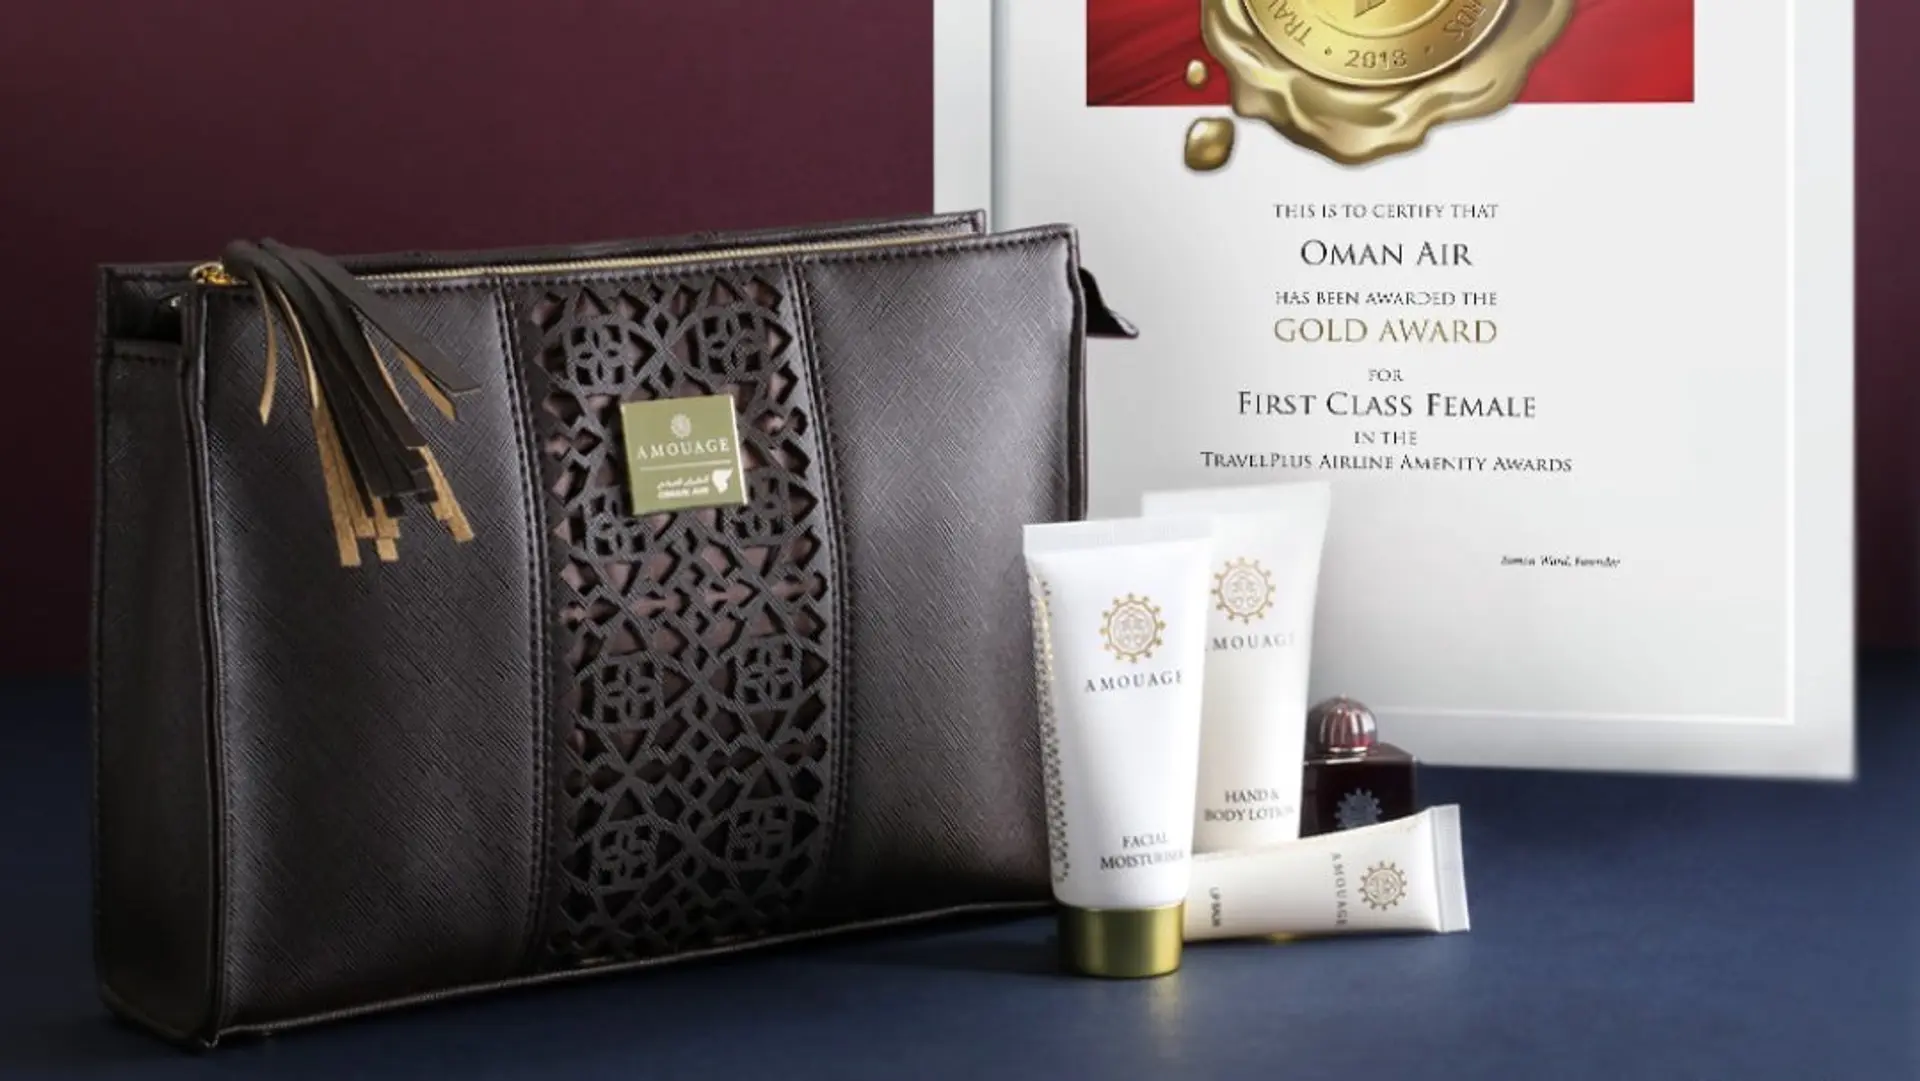 Airline review Amenities & Facilities - Oman Air - 2